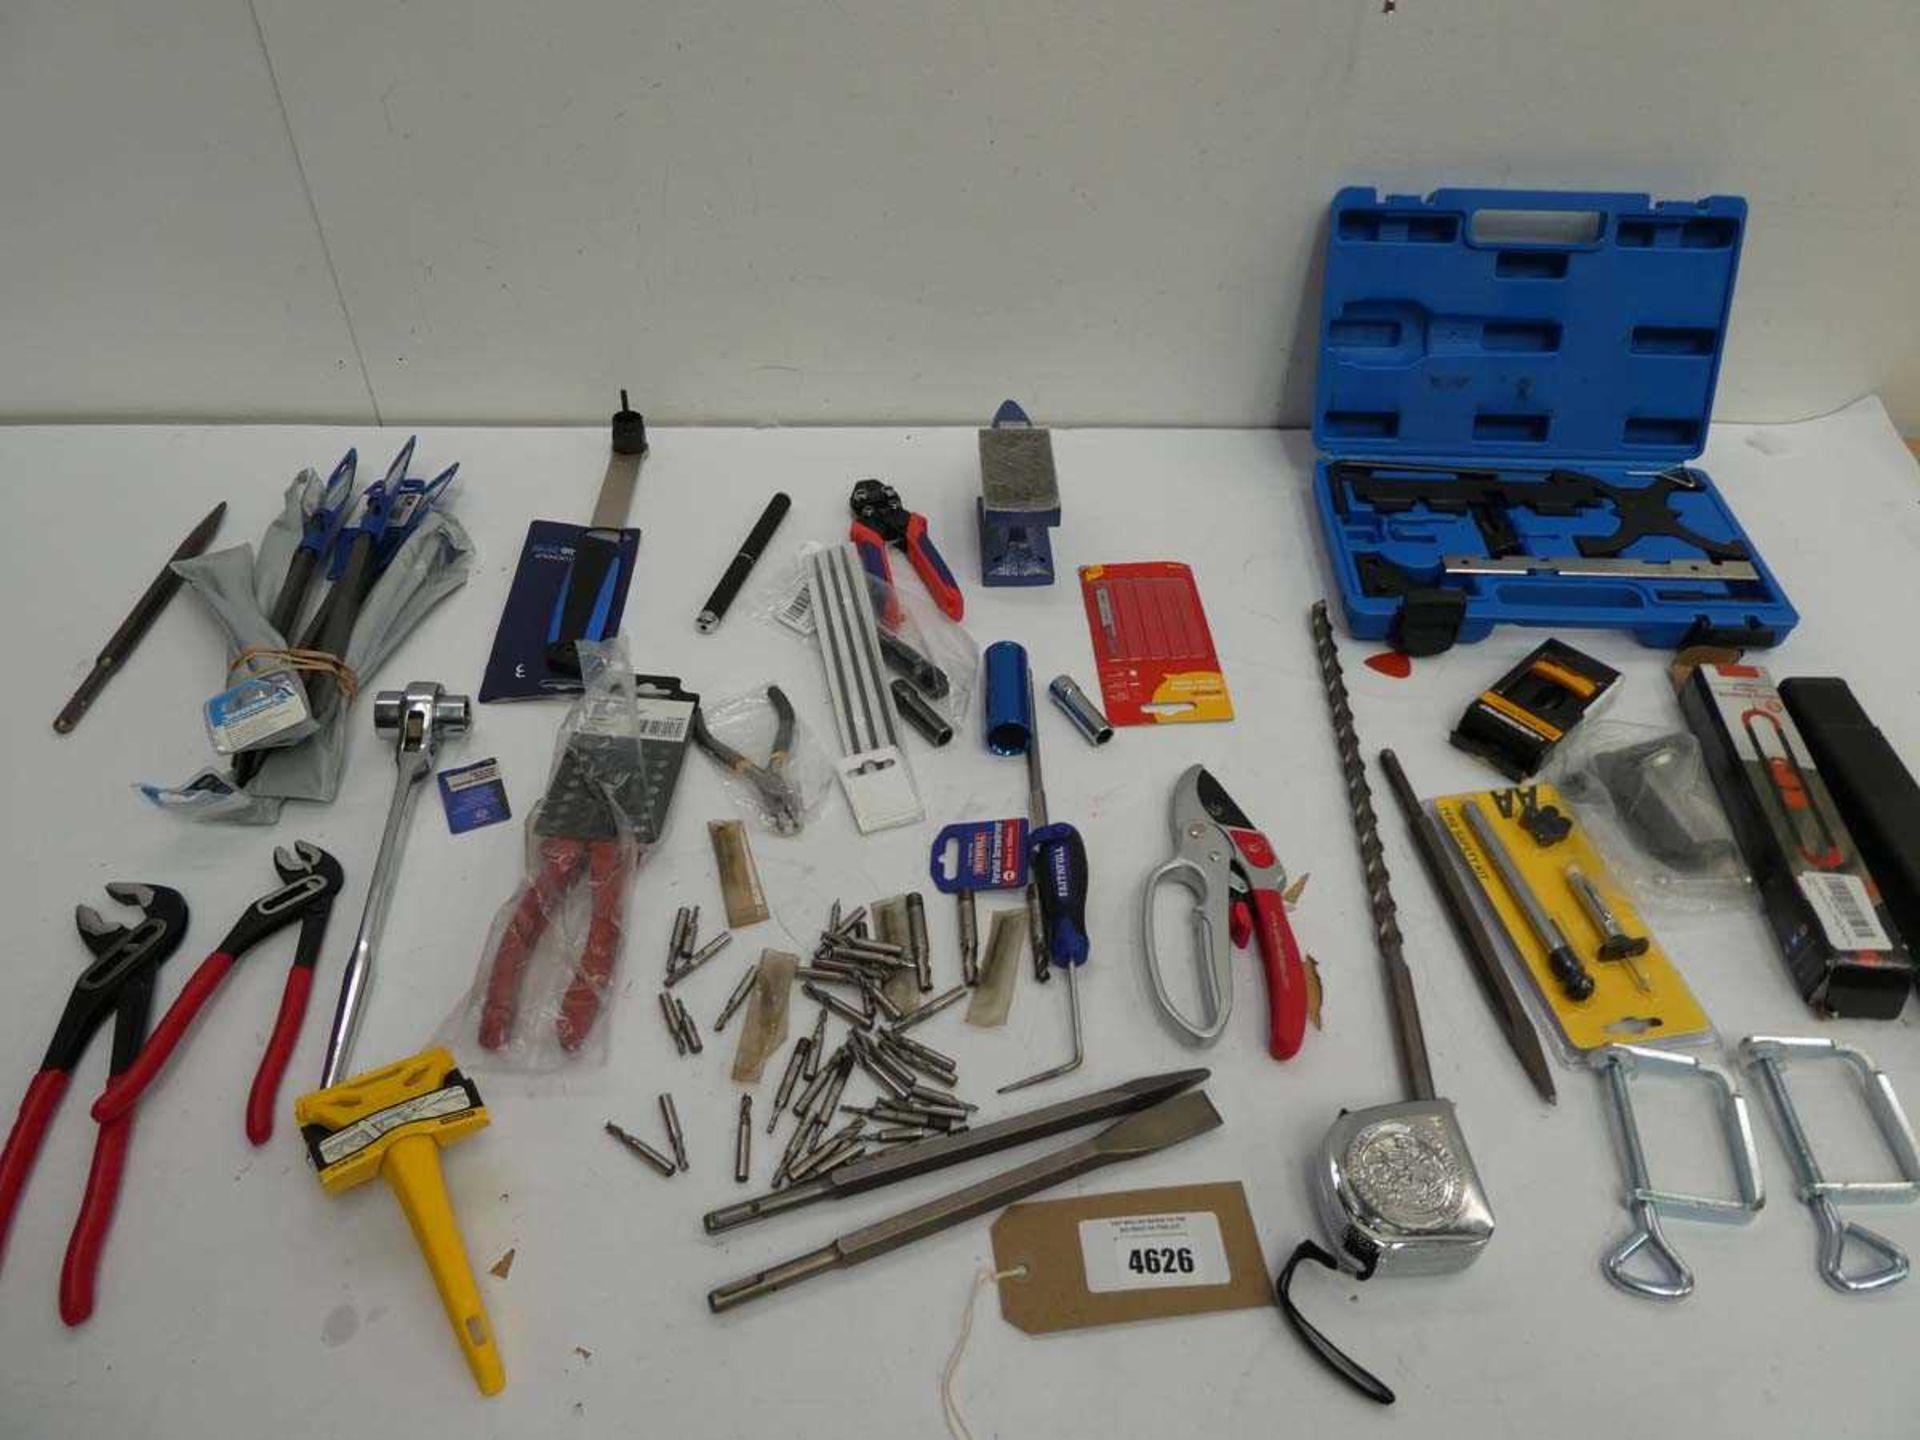 +VAT Wrench, chisels, drill bits, anvil, tape measure, sockets, files, adjustable spanners and other